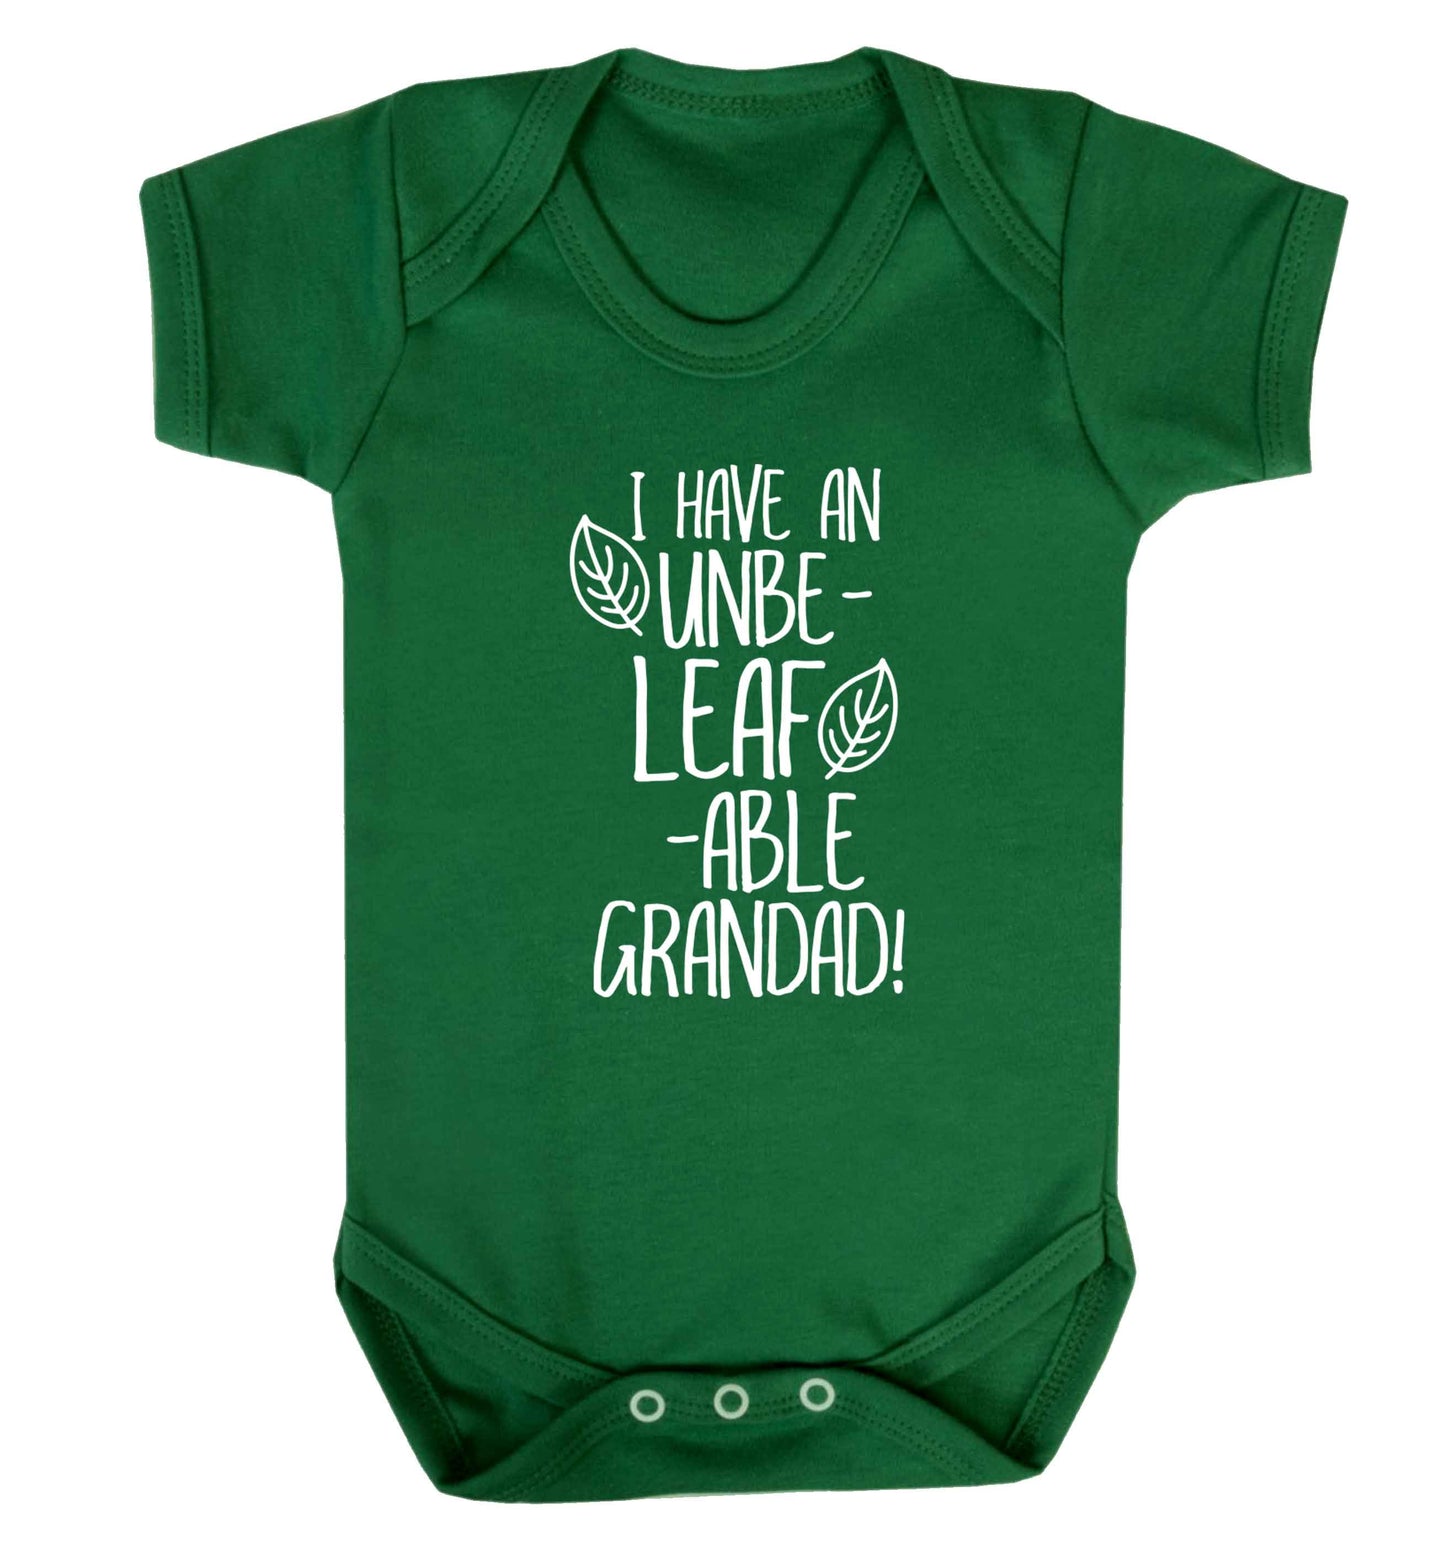 I have an unbe-leaf-able grandad Baby Vest green 18-24 months